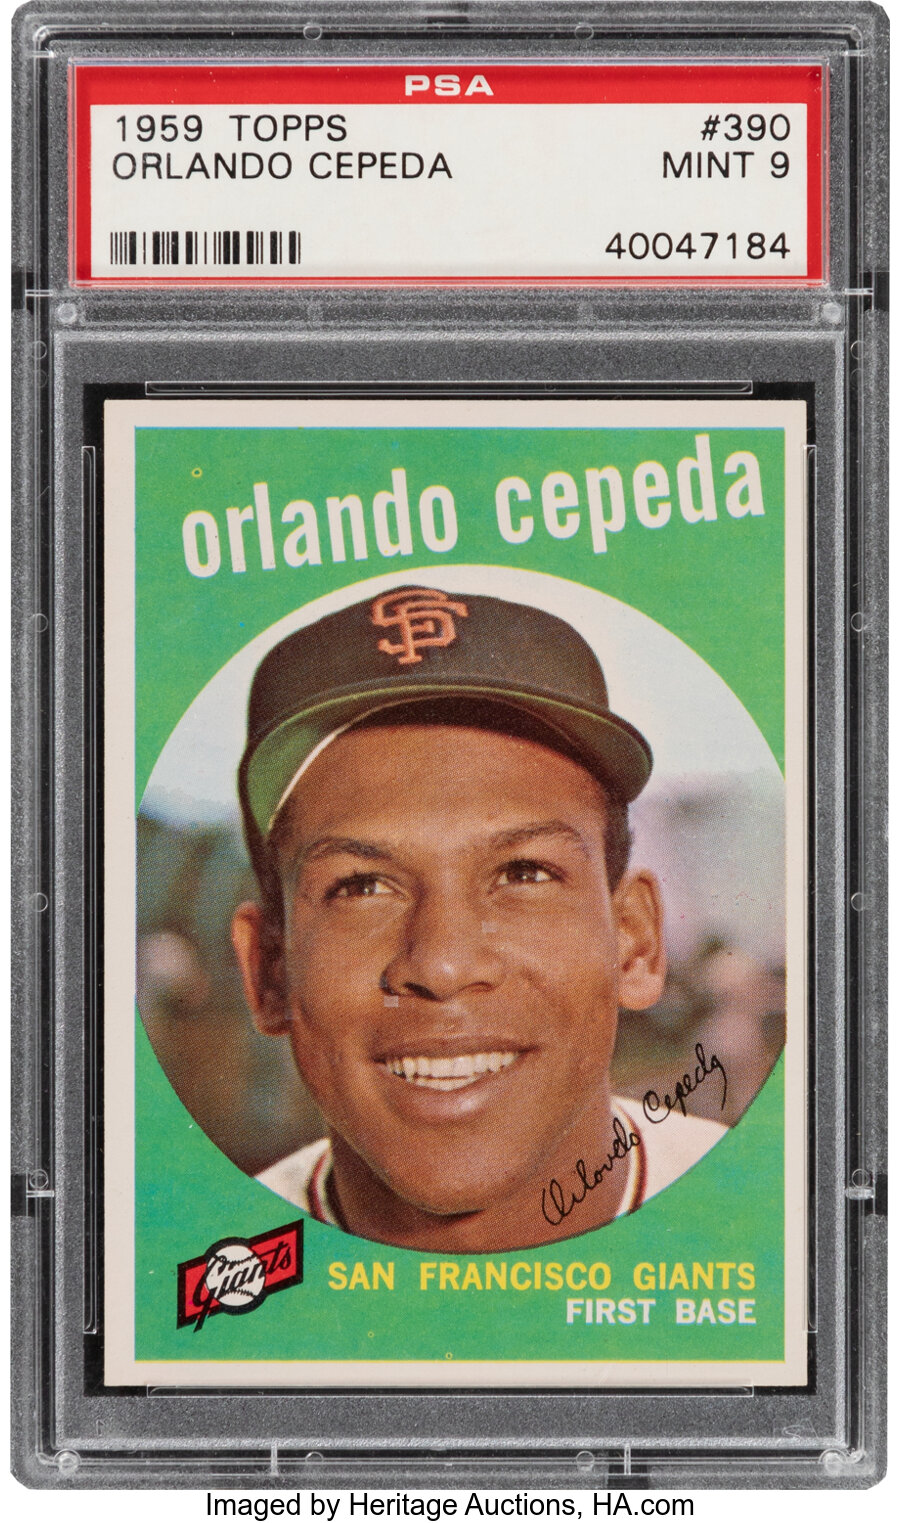 1959 Topps Orlando Cepeda #390 PSA Mint 9 - Two Higher